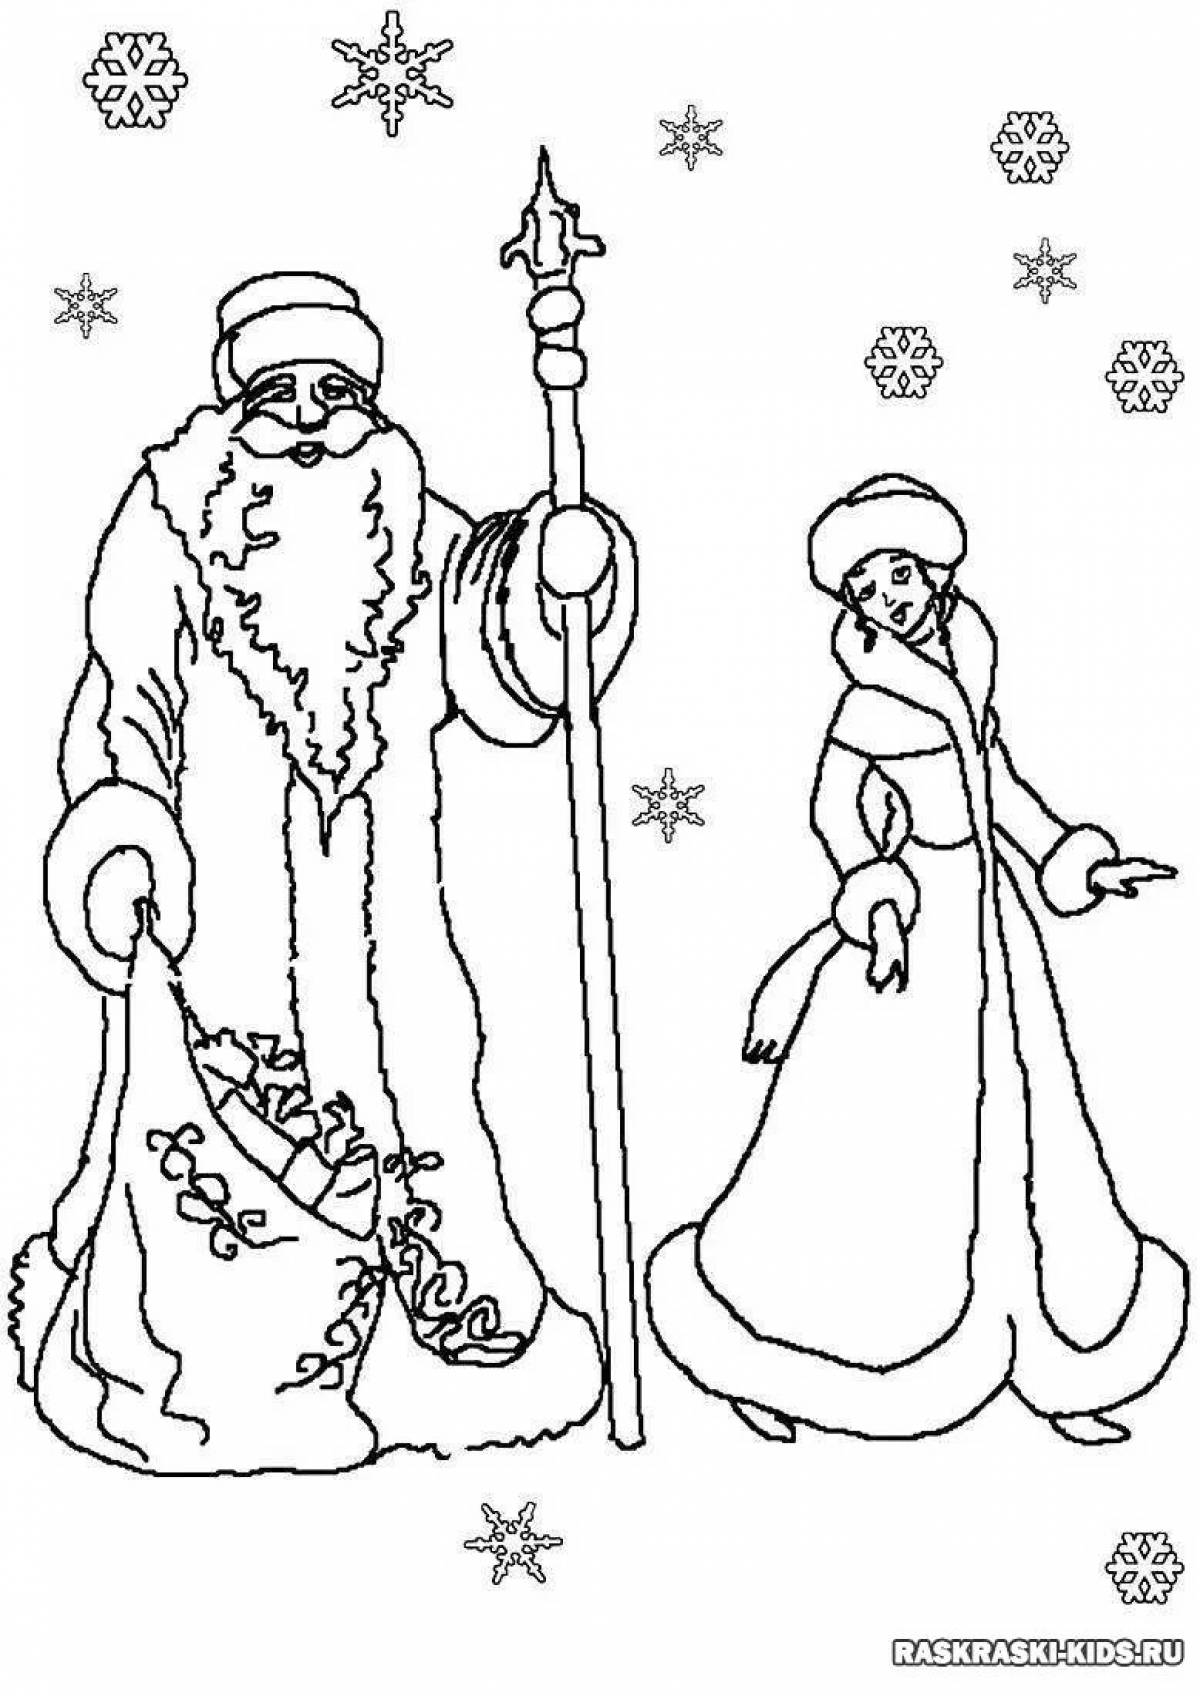 Glowing drawing of Santa Claus and Snow Maiden